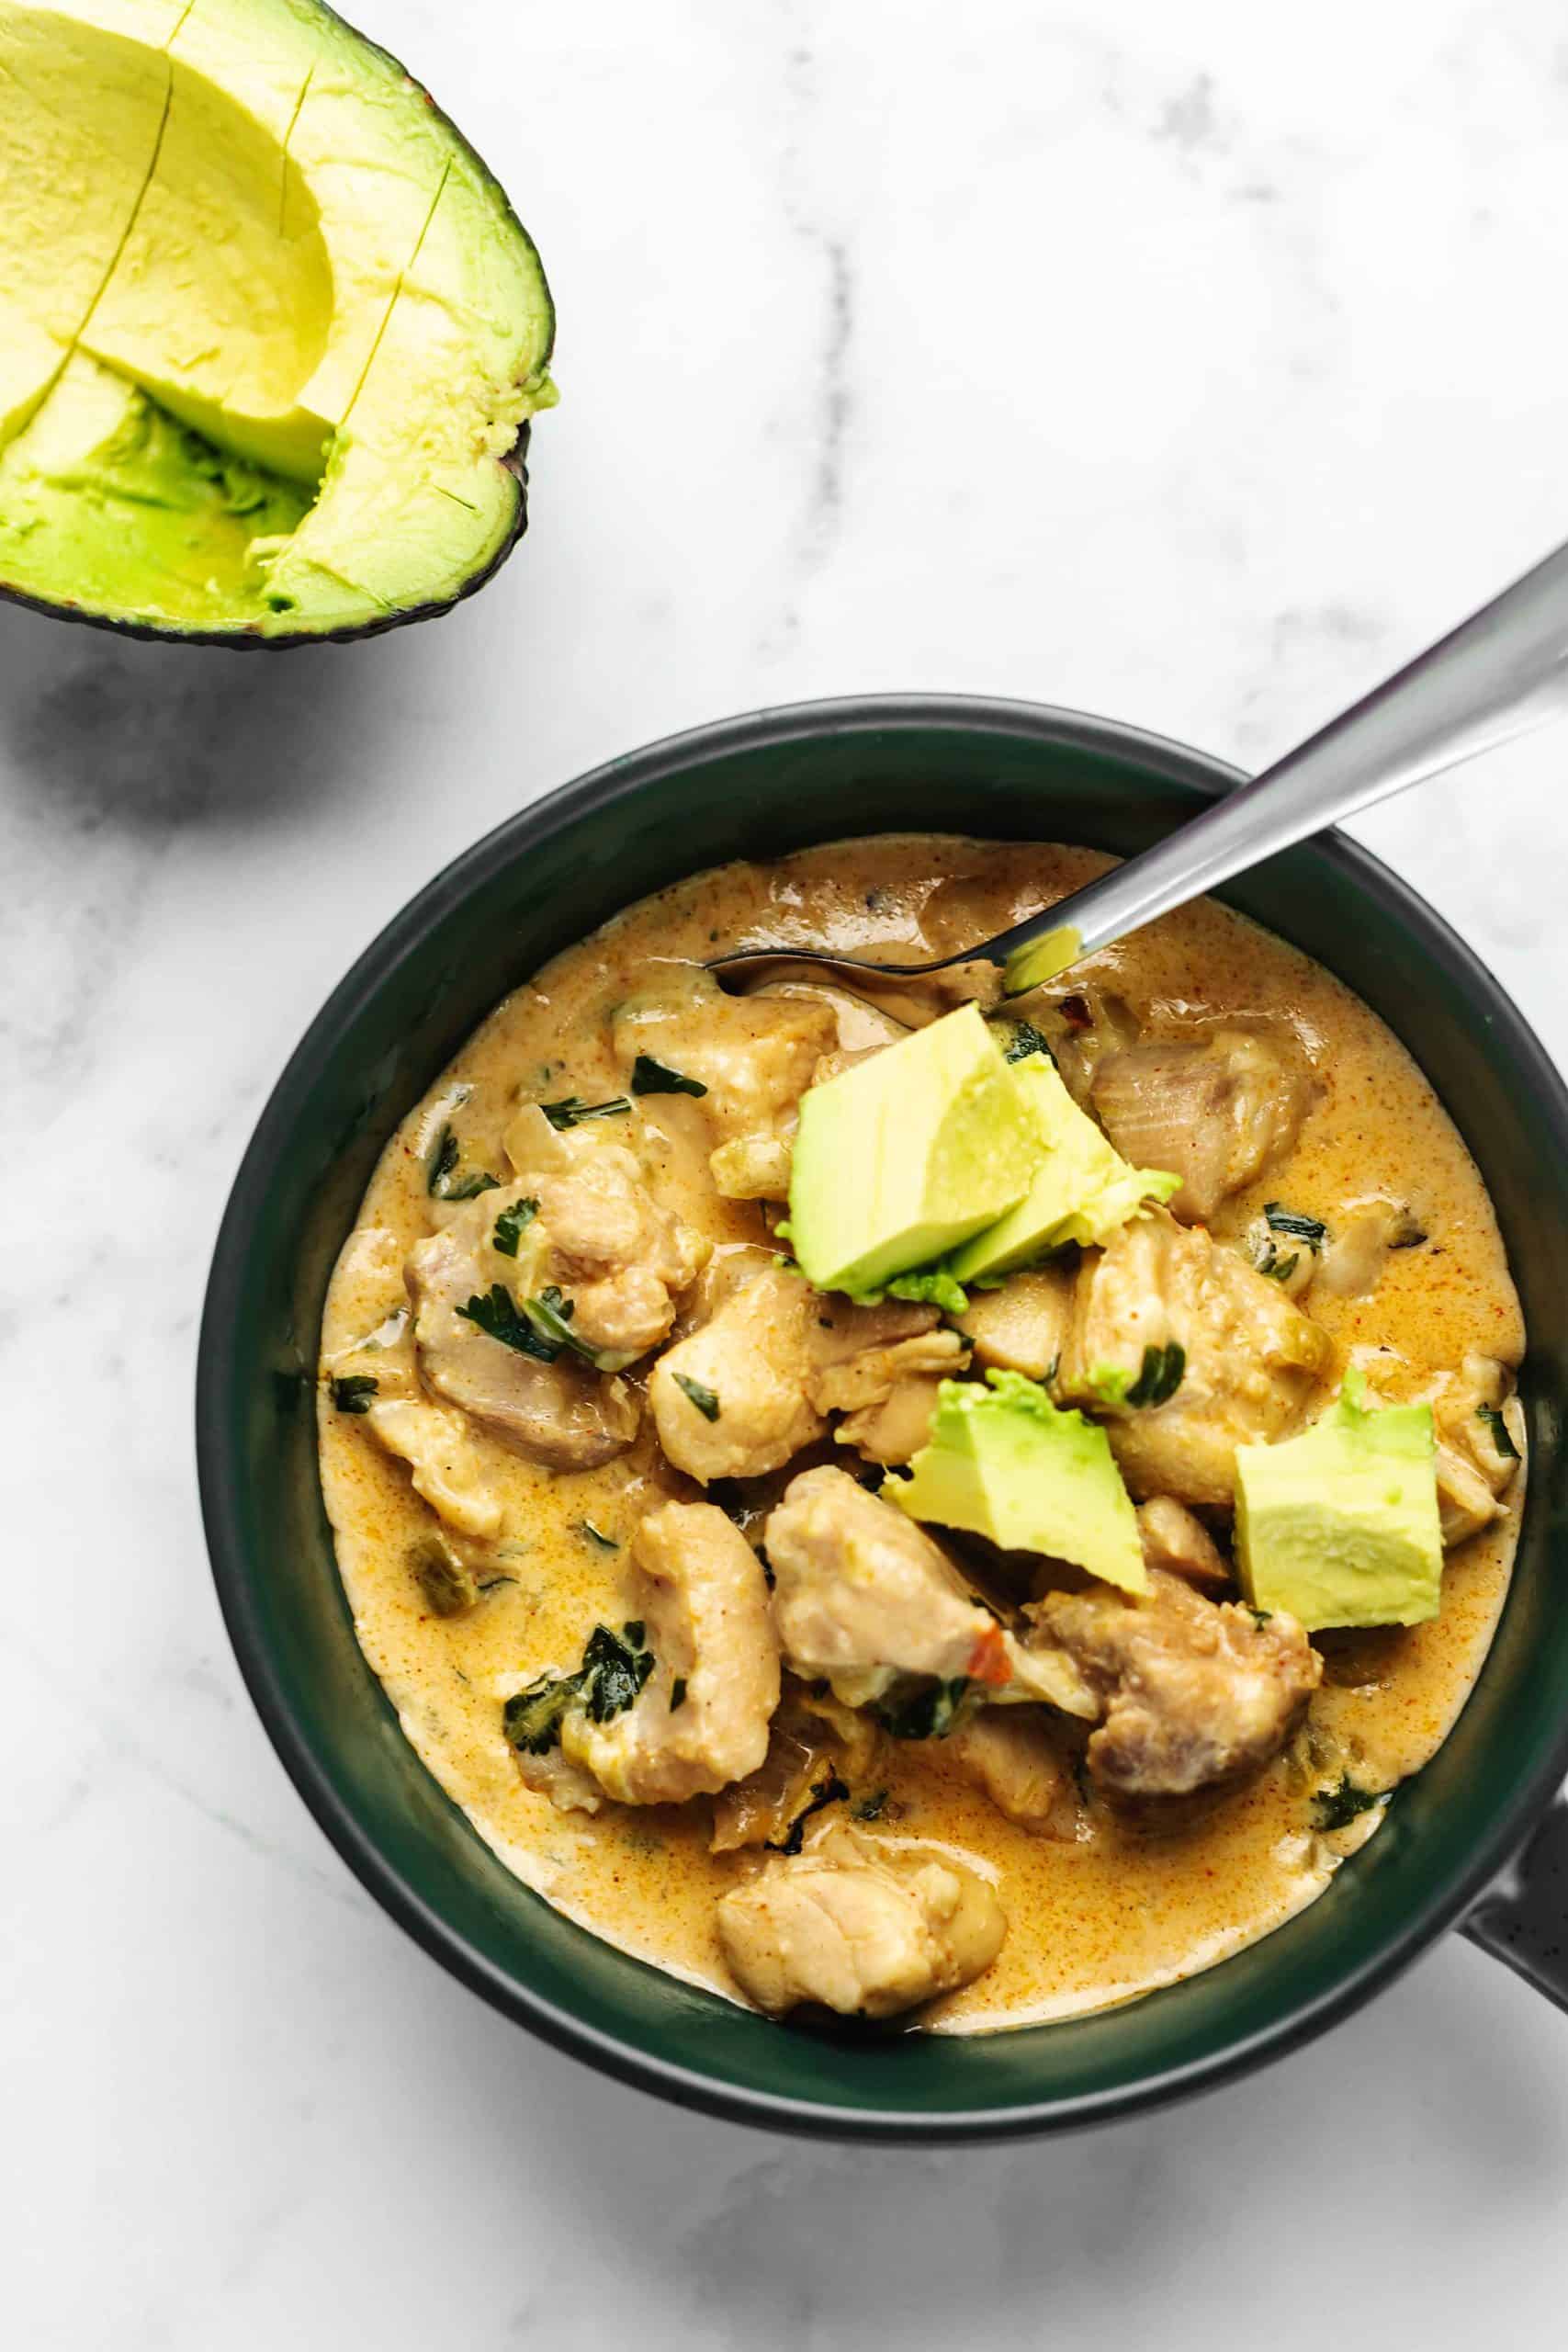 Low Carb Keto Cream Cheese Chicken Chili with Jennifer.